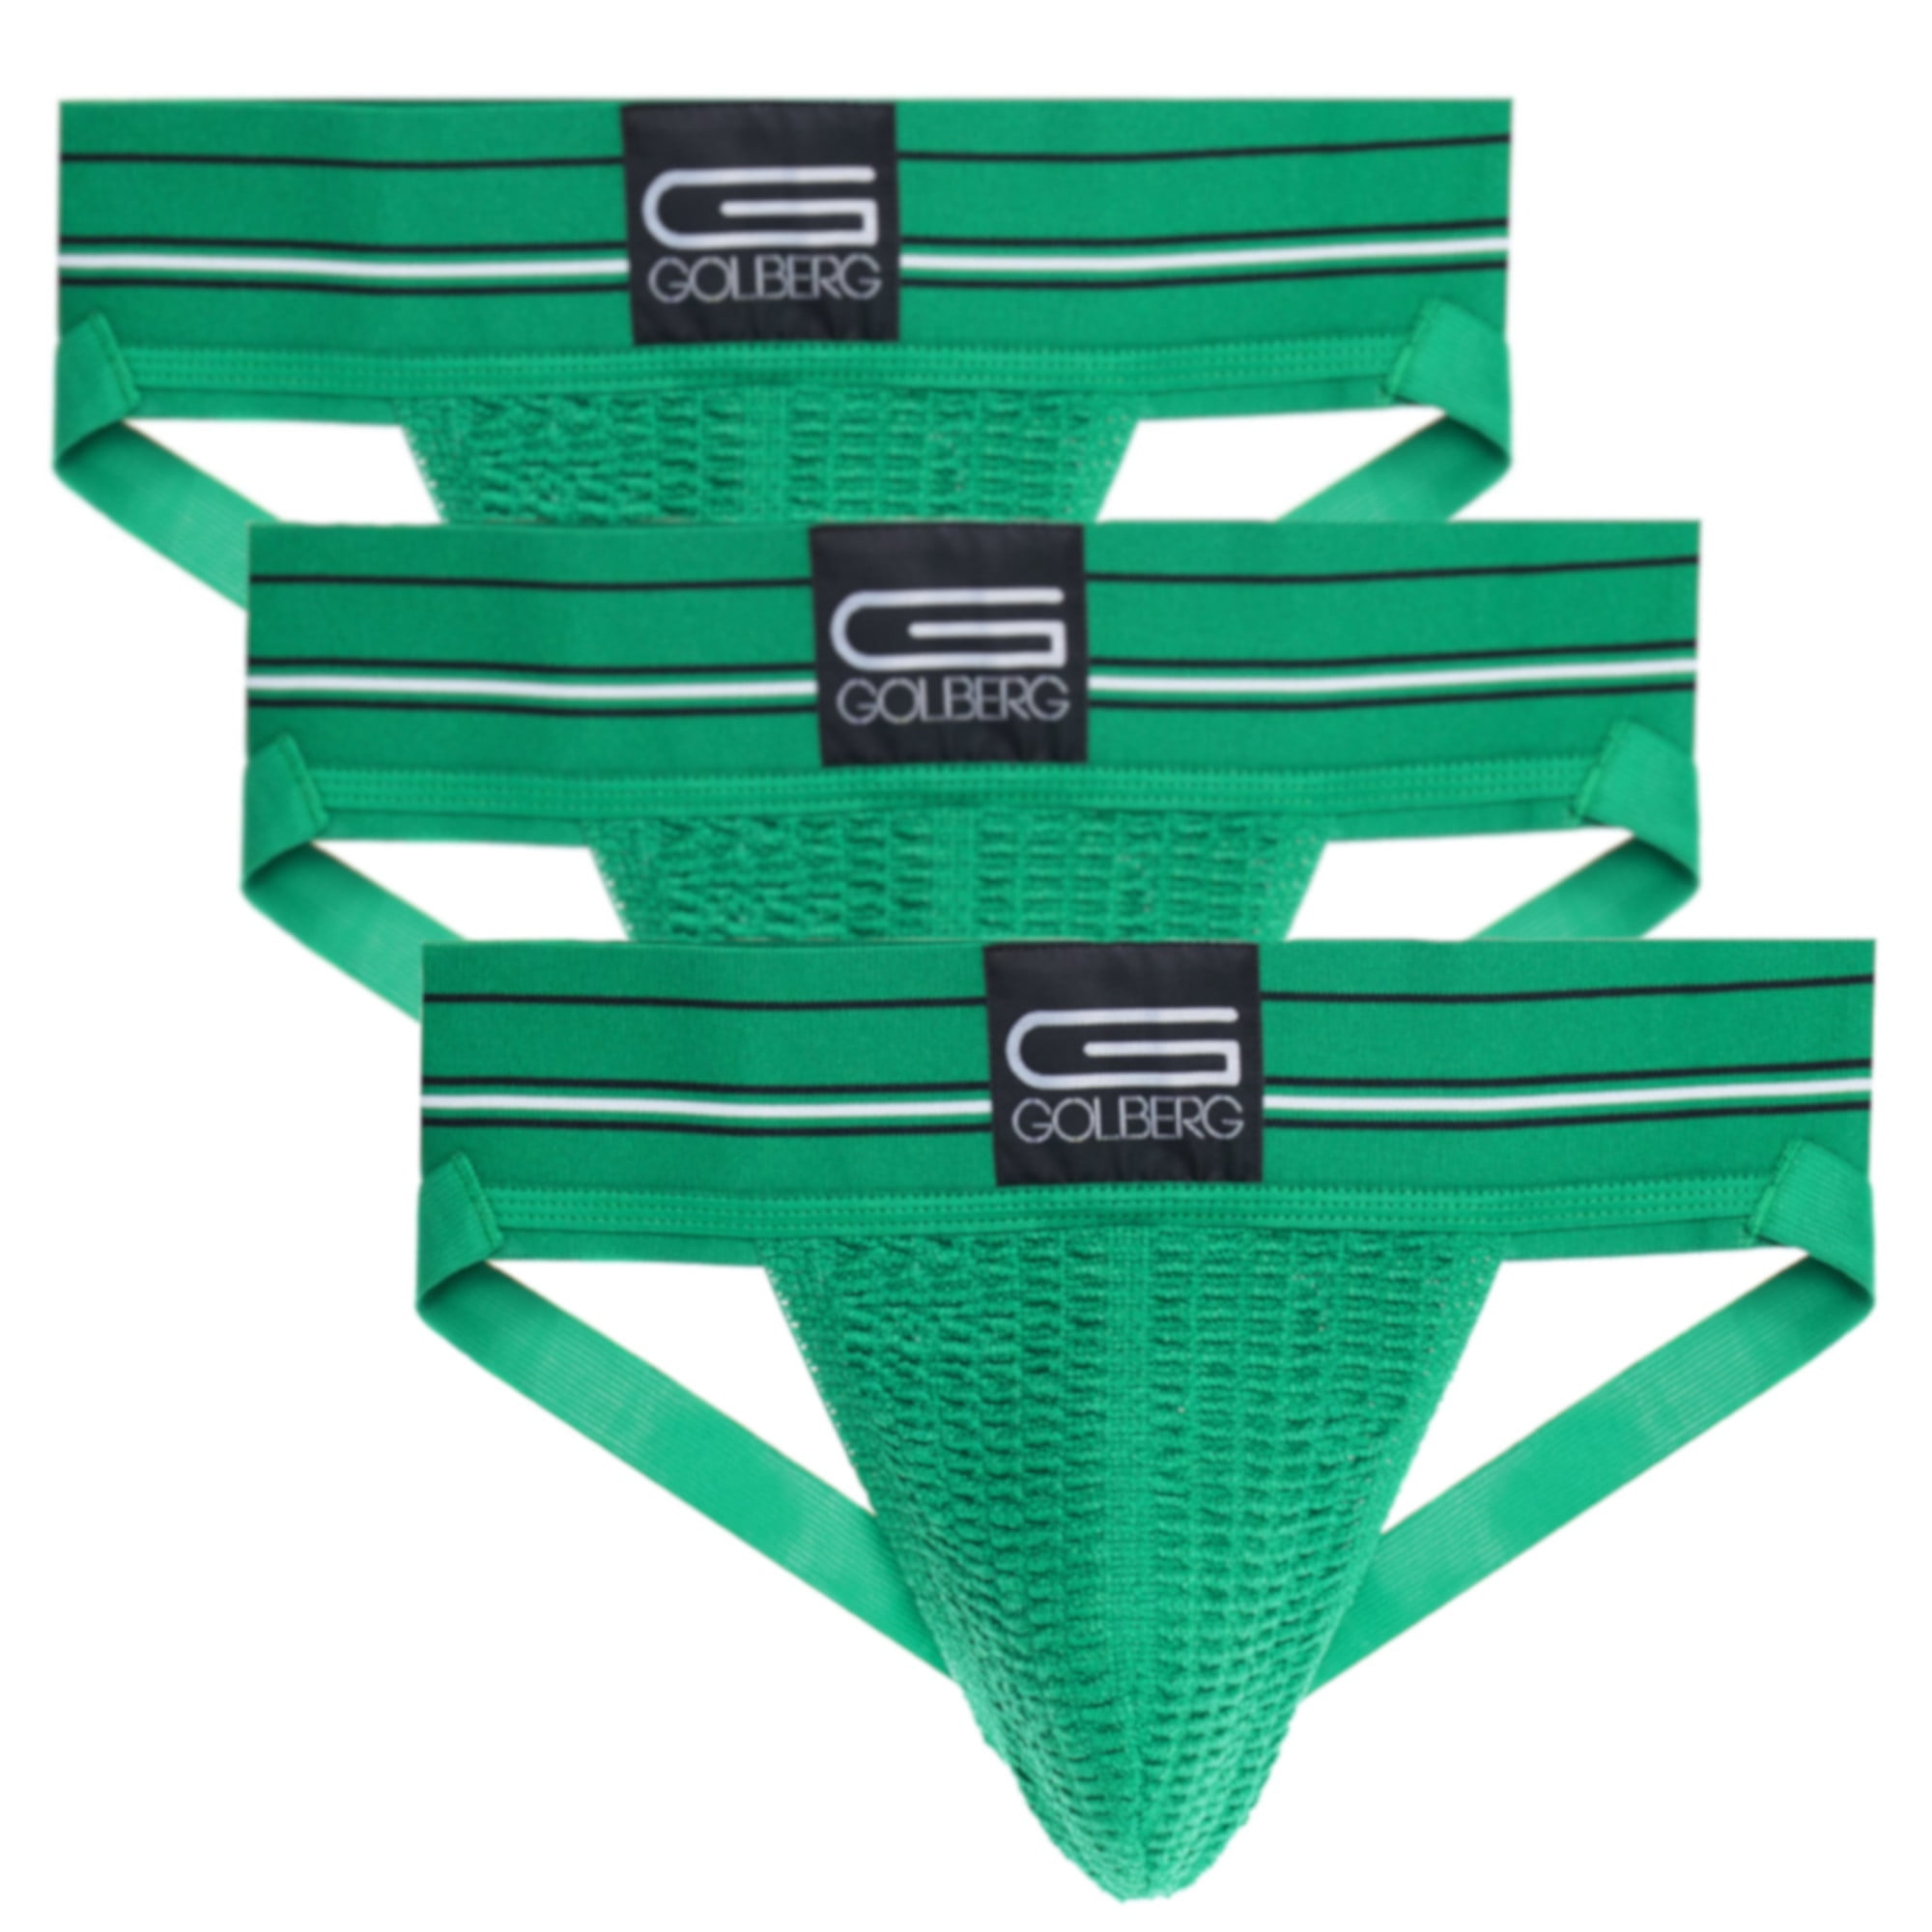 GOLBERG G Athletic Supporter Multiple Colors Naturally Contoured Waistband 